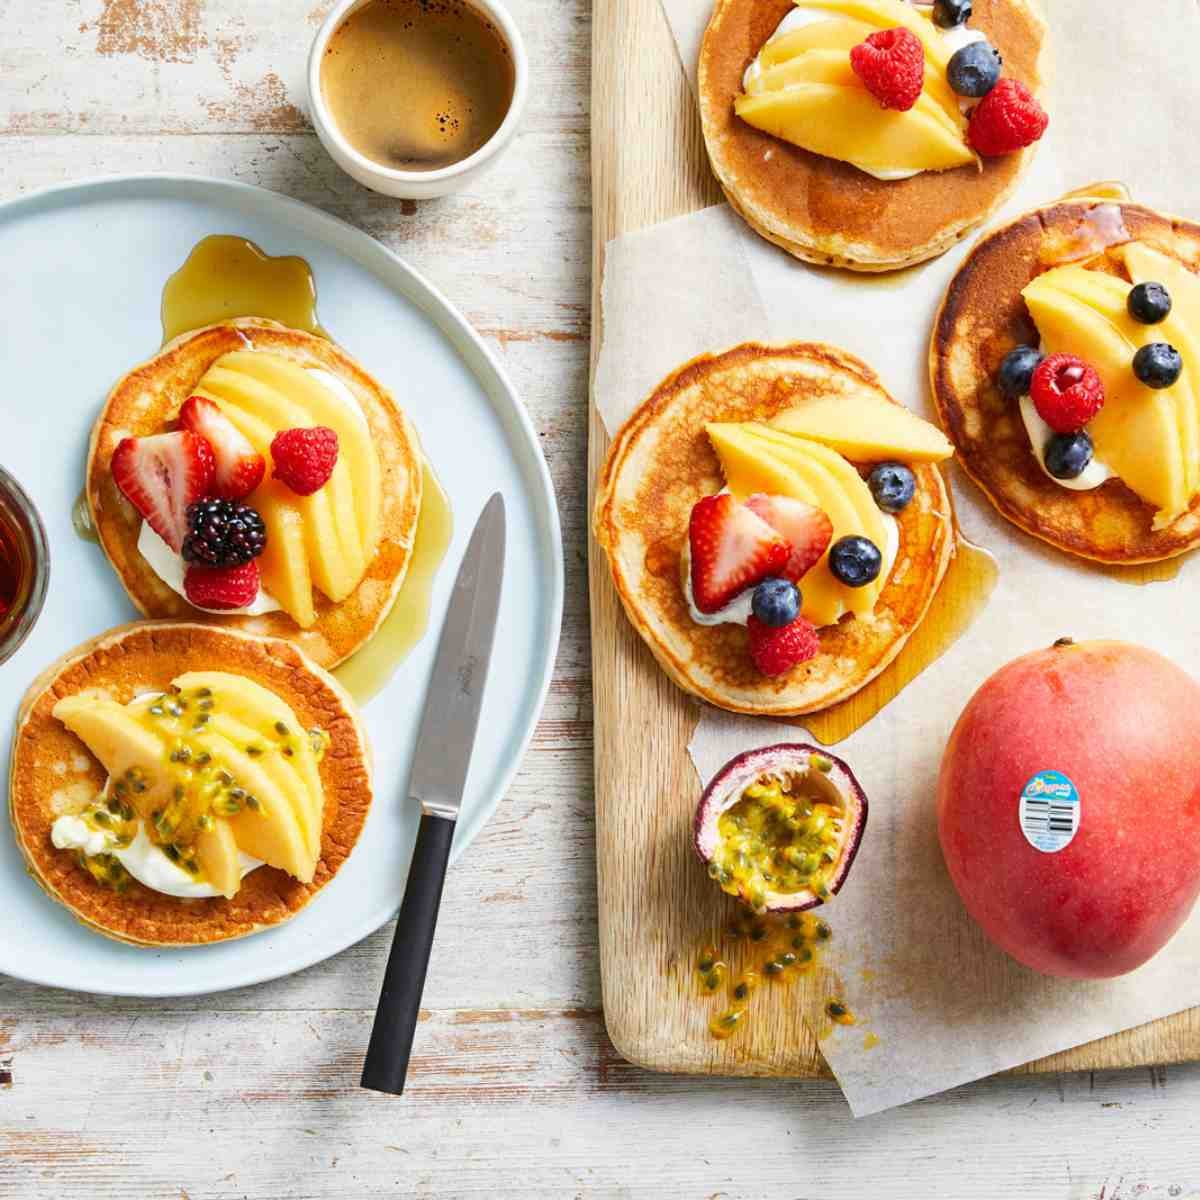 Stacks of pancakes topped with yoghurt, and various fruit such as blackberries, mangoes, blueberries, passionfruit and strawberries.